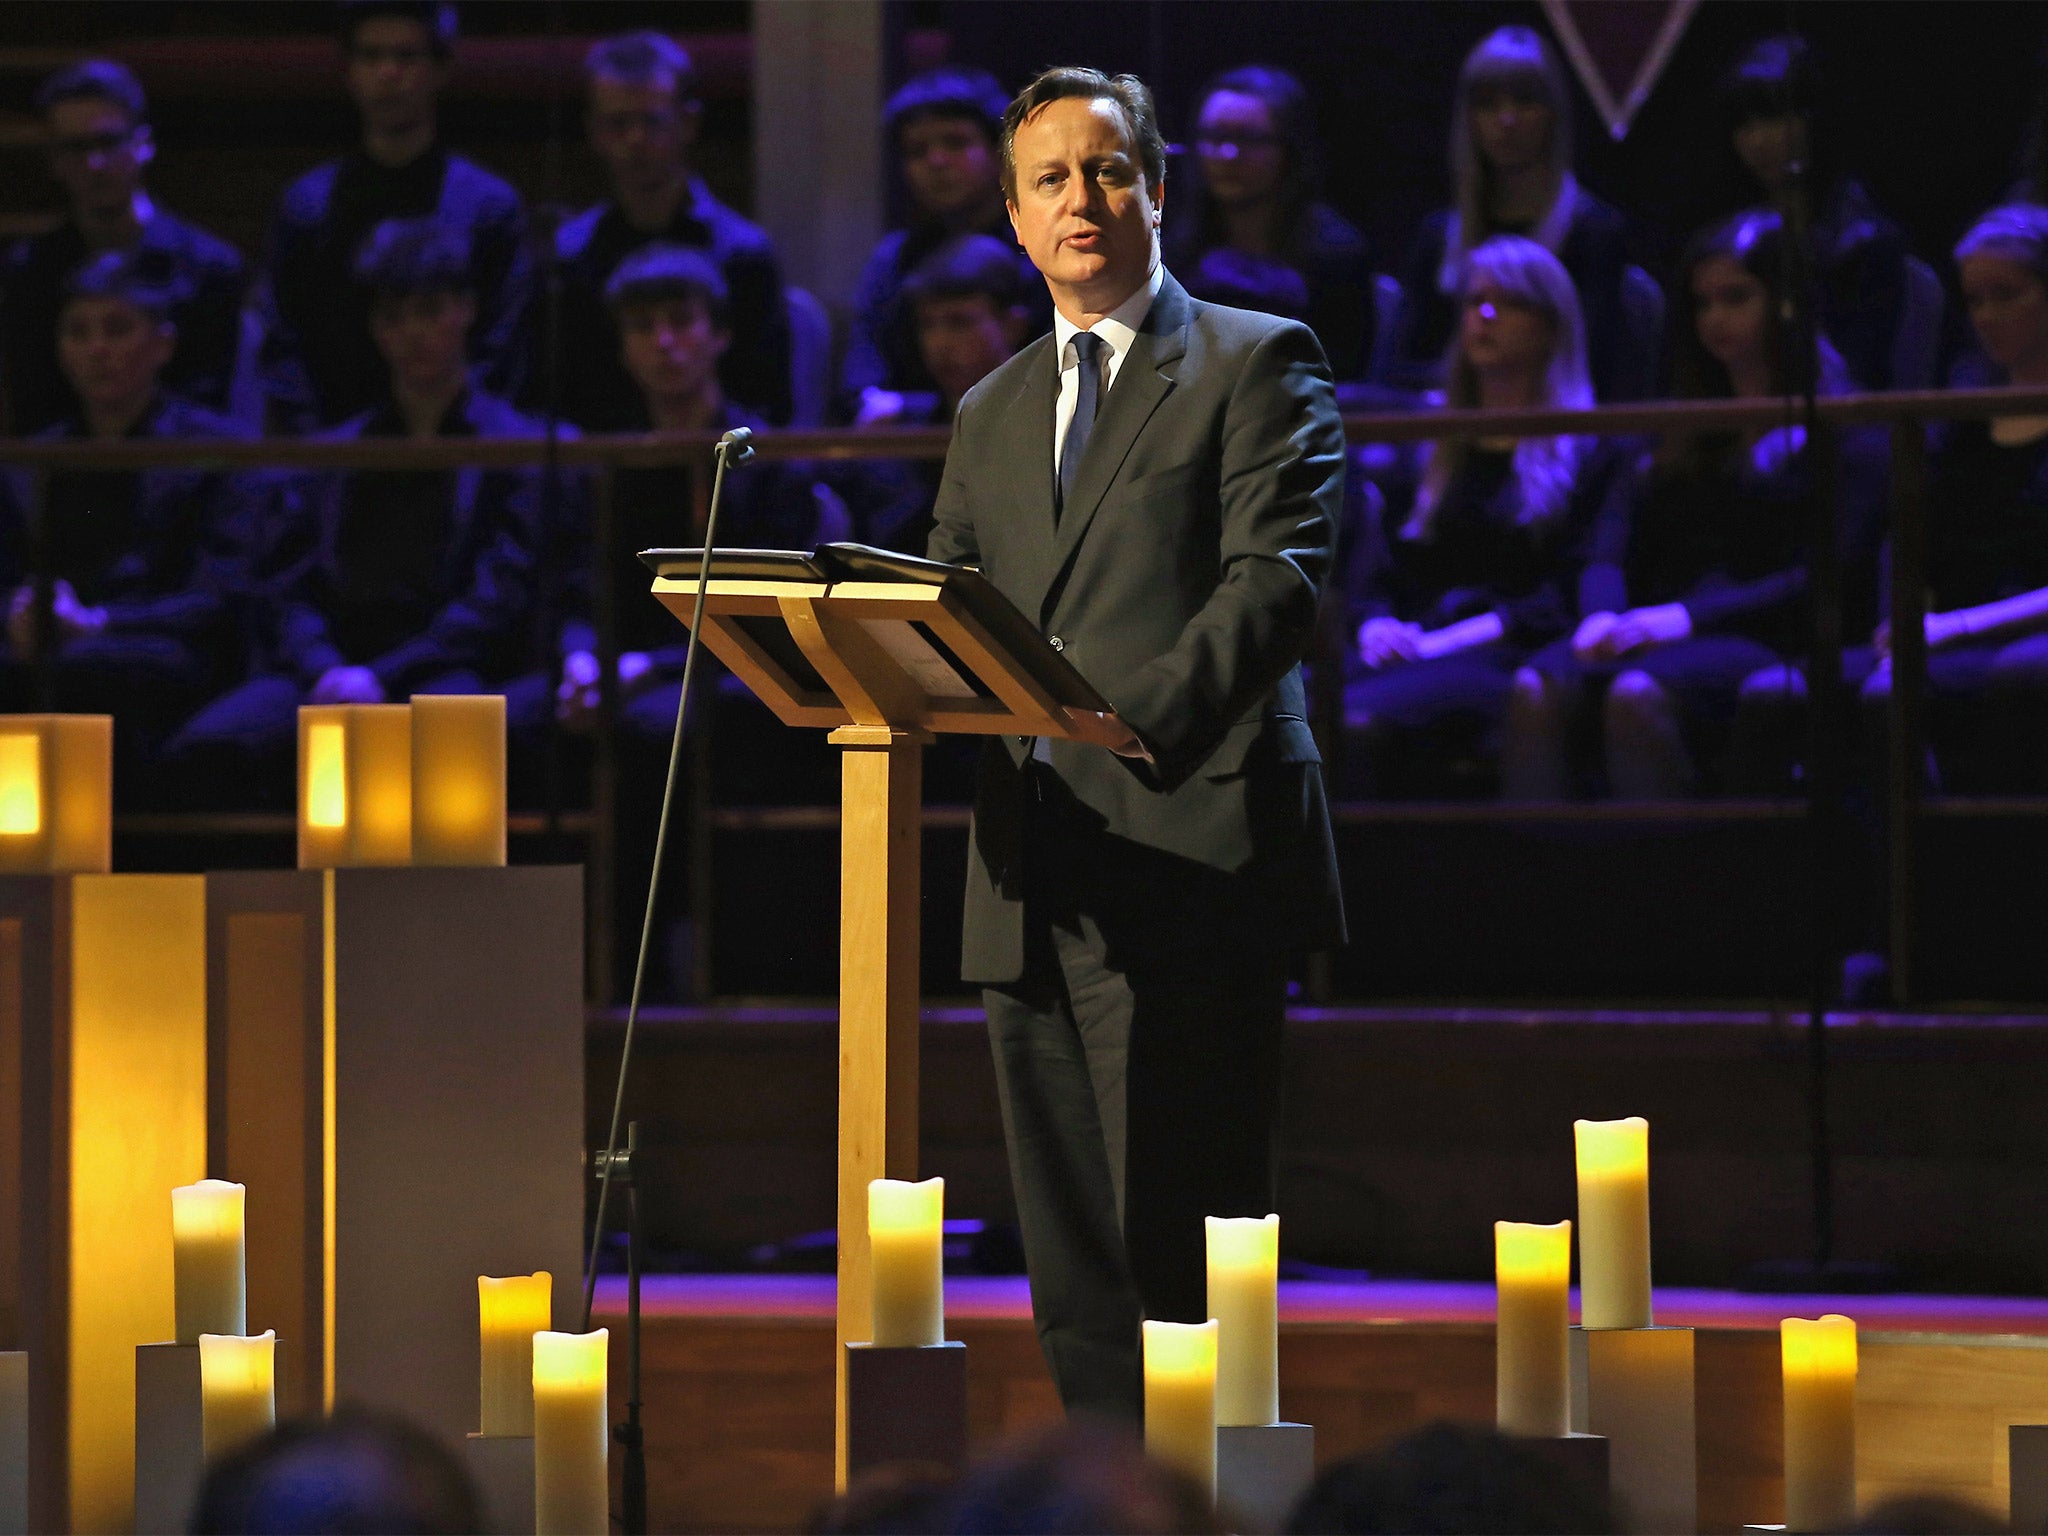 David Cameron at the service in Westminster (Getty)